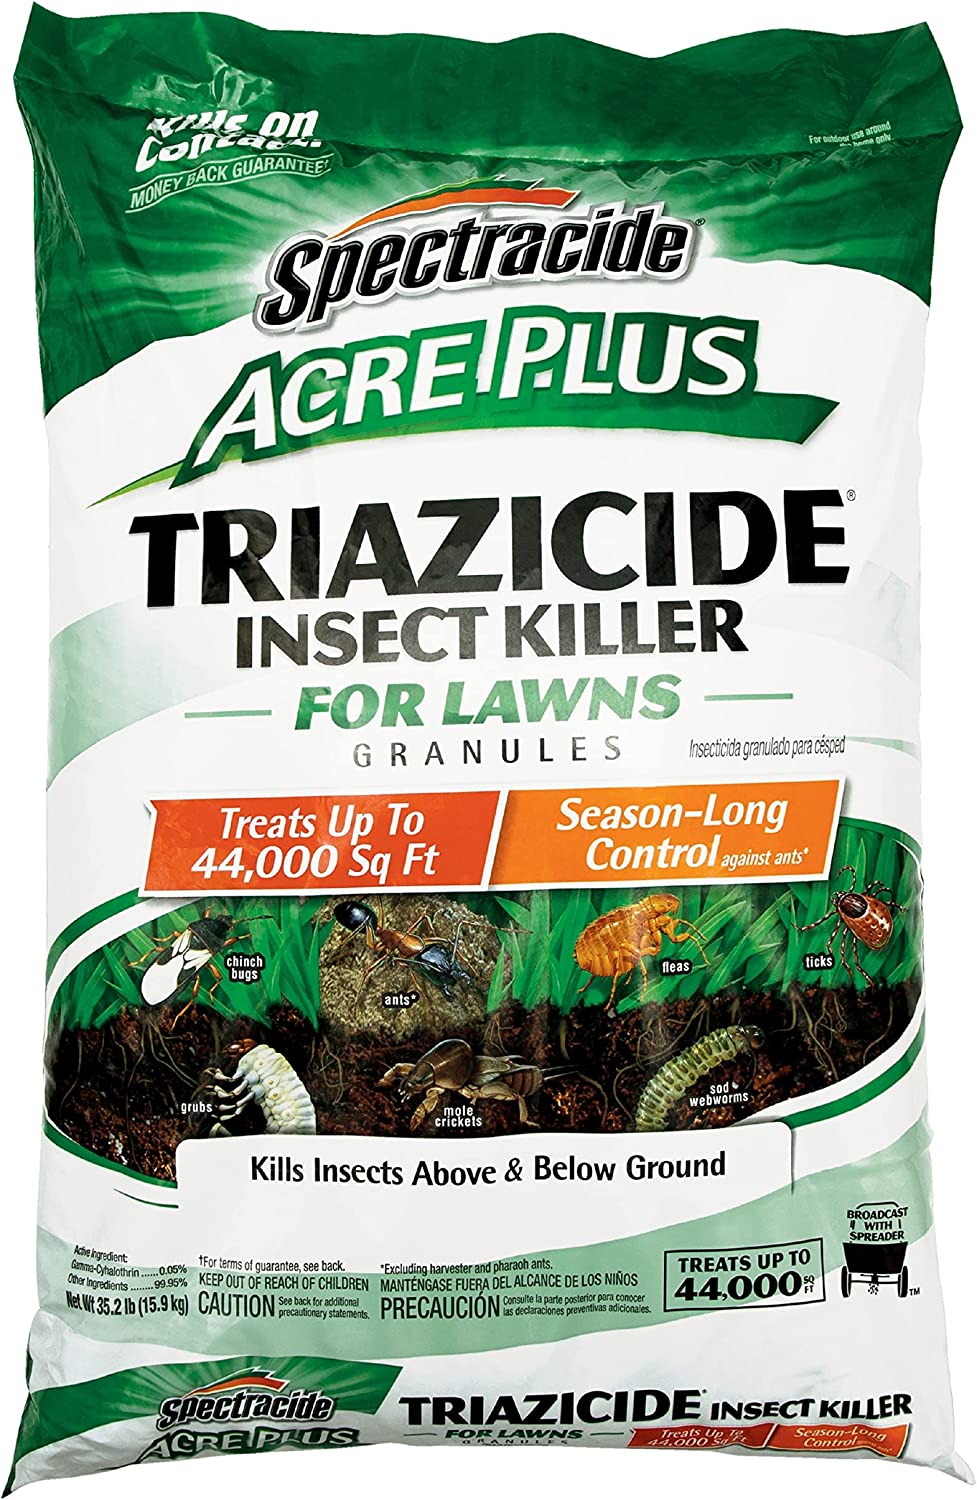 Spectracide Acre Plus Triazicide Insect Killer For Lawns Granules